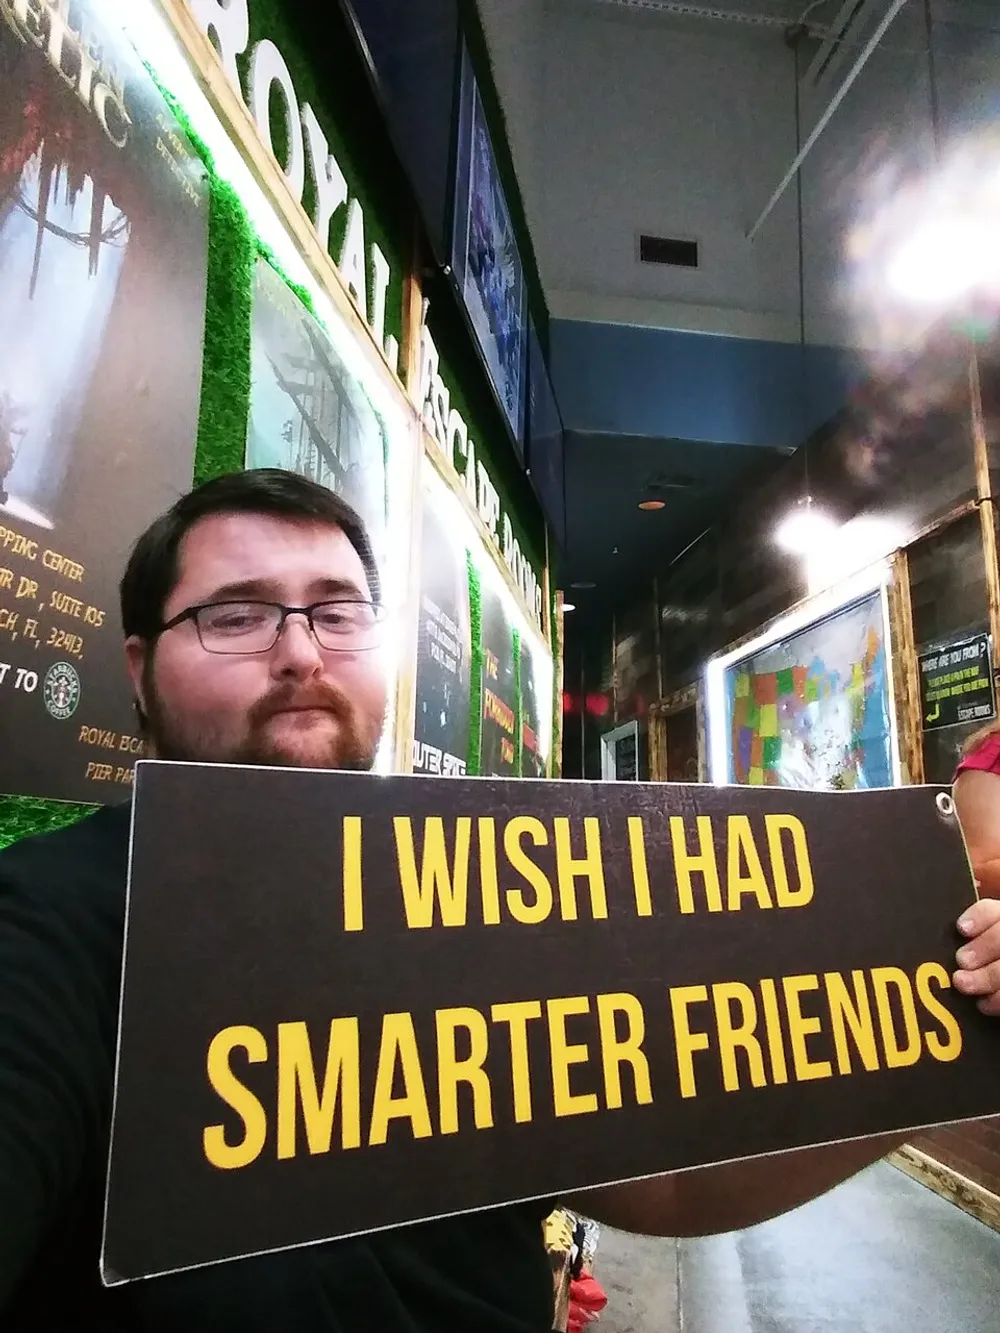 A person is taking a selfie while holding a sign that reads I WISH I HAD SMARTER FRIENDS